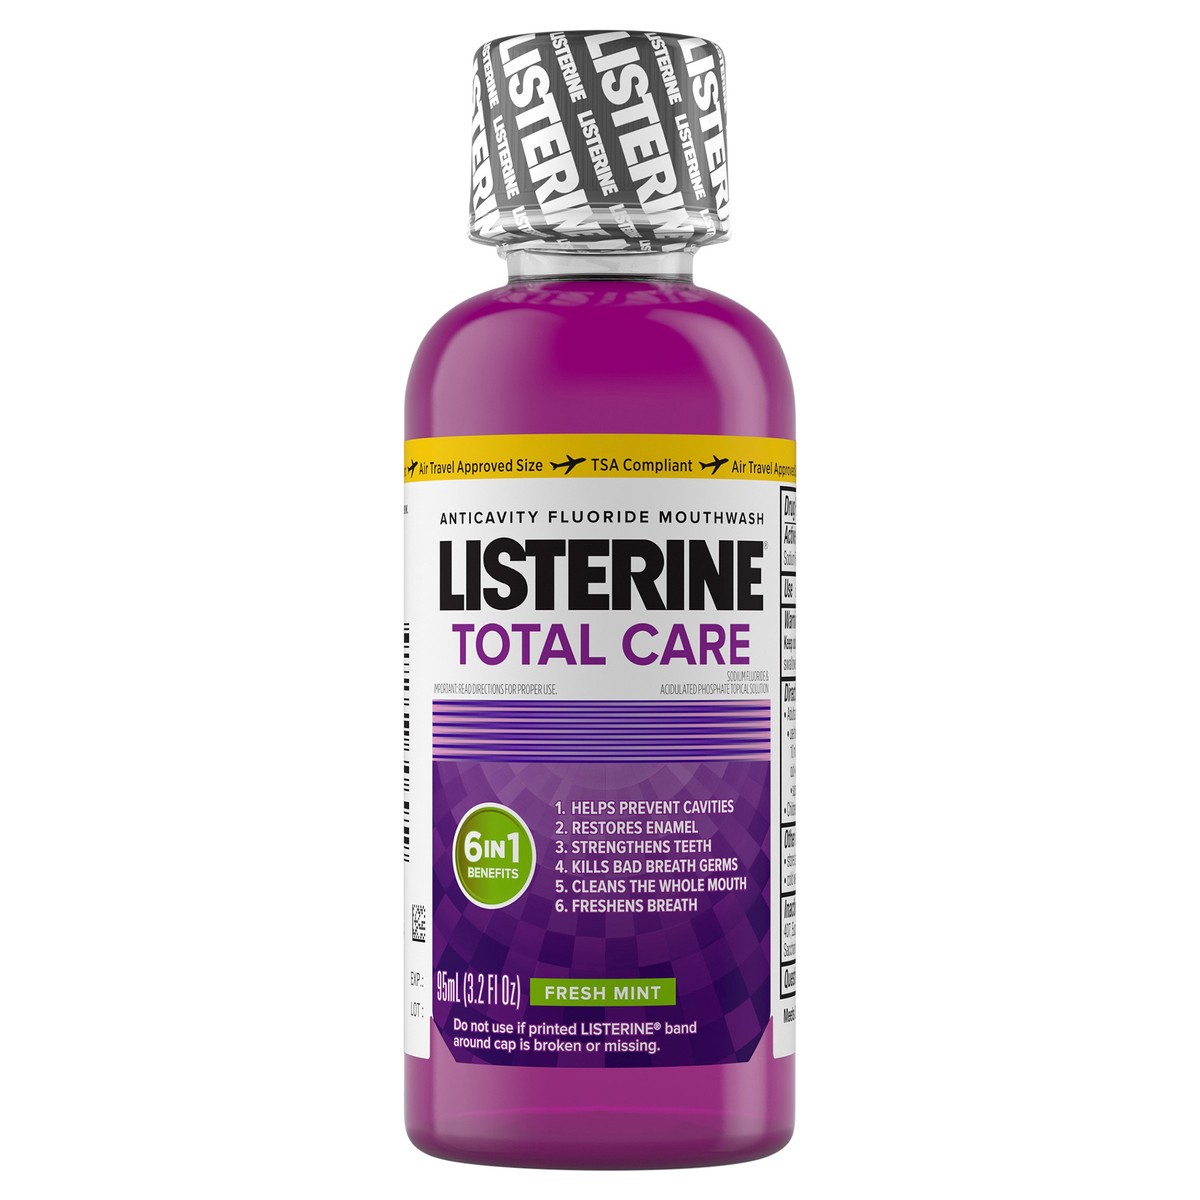 slide 6 of 11, Listerine Total Care Anticavity Fluoride Mouthwash, 6 Benefit Oral Rinse Kills 99% of Bad Breath Germs, Prevents Cavities, Strengthens Enamel, ADA-Accepted, Fresh Mint, Travel Size, 95 mL, 95 ml